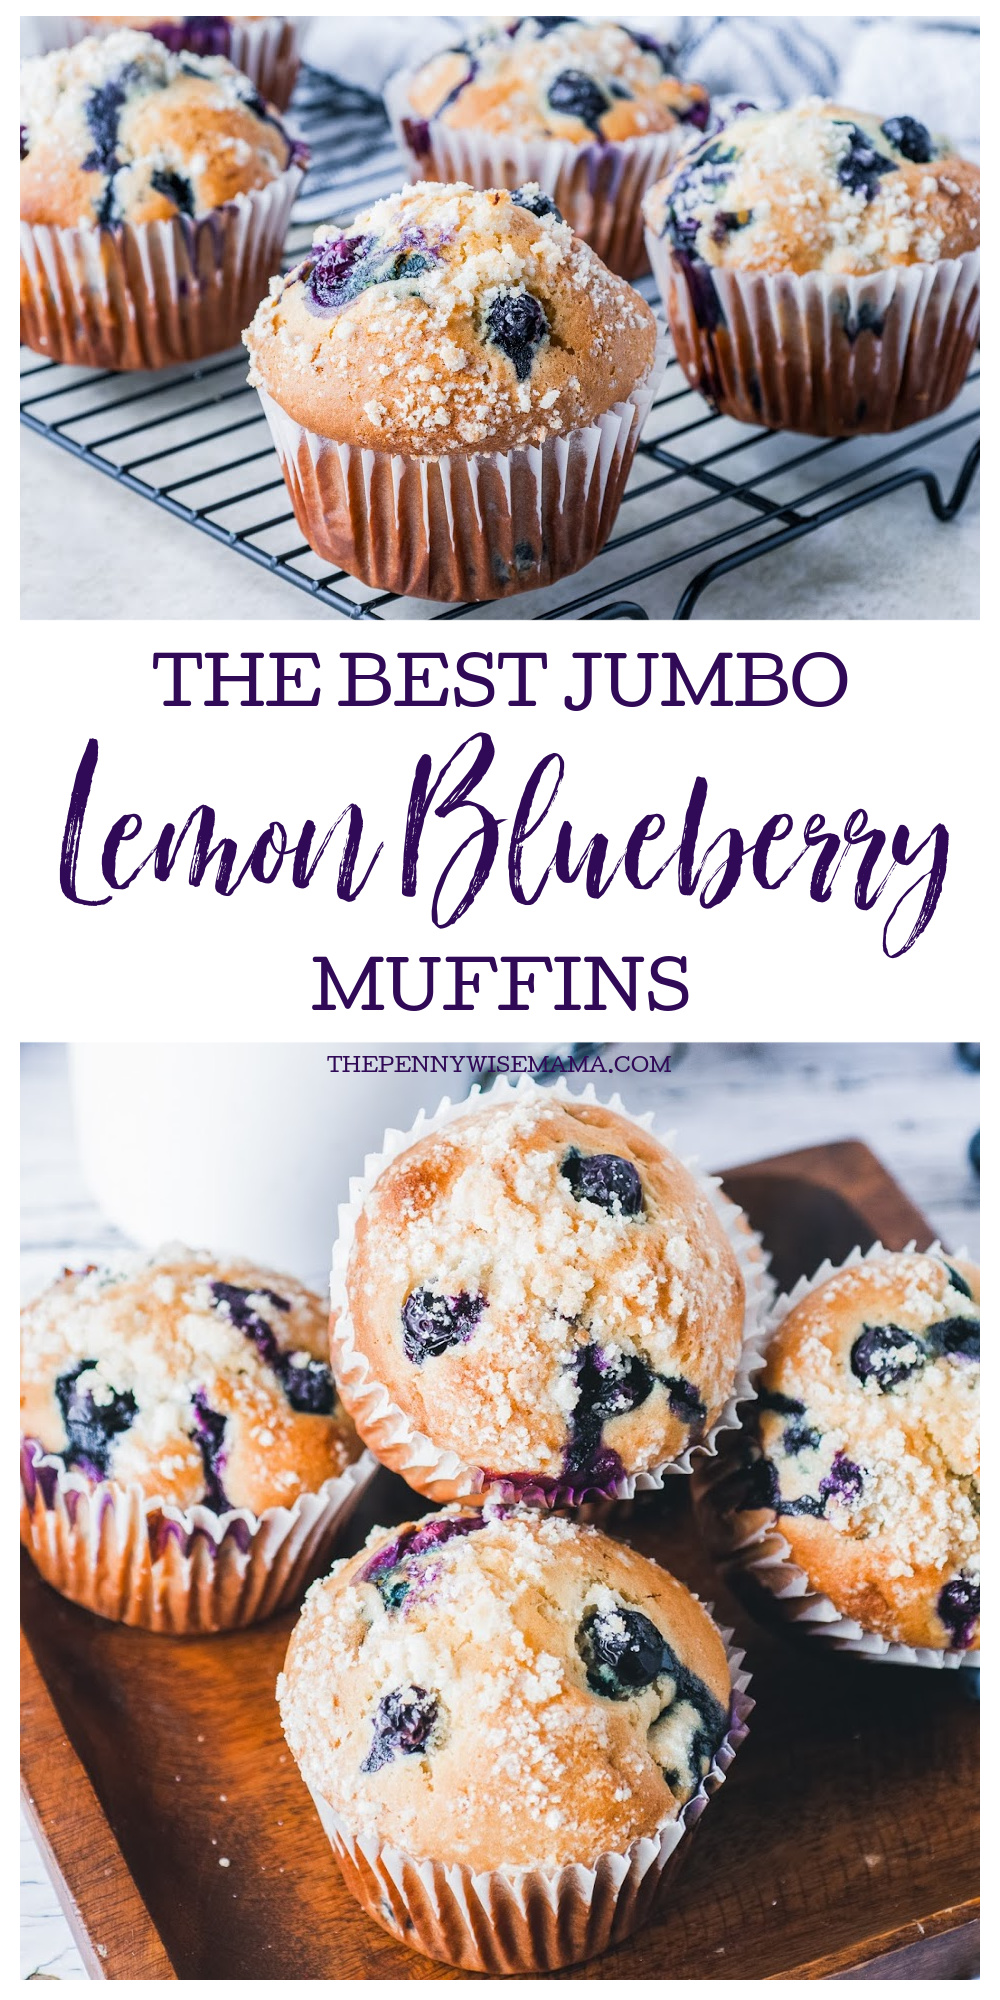 The best jumbo lemon blueberry muffins! Soft and moist with a zesty lemon crumble topping, they are delicious and full of flavor.